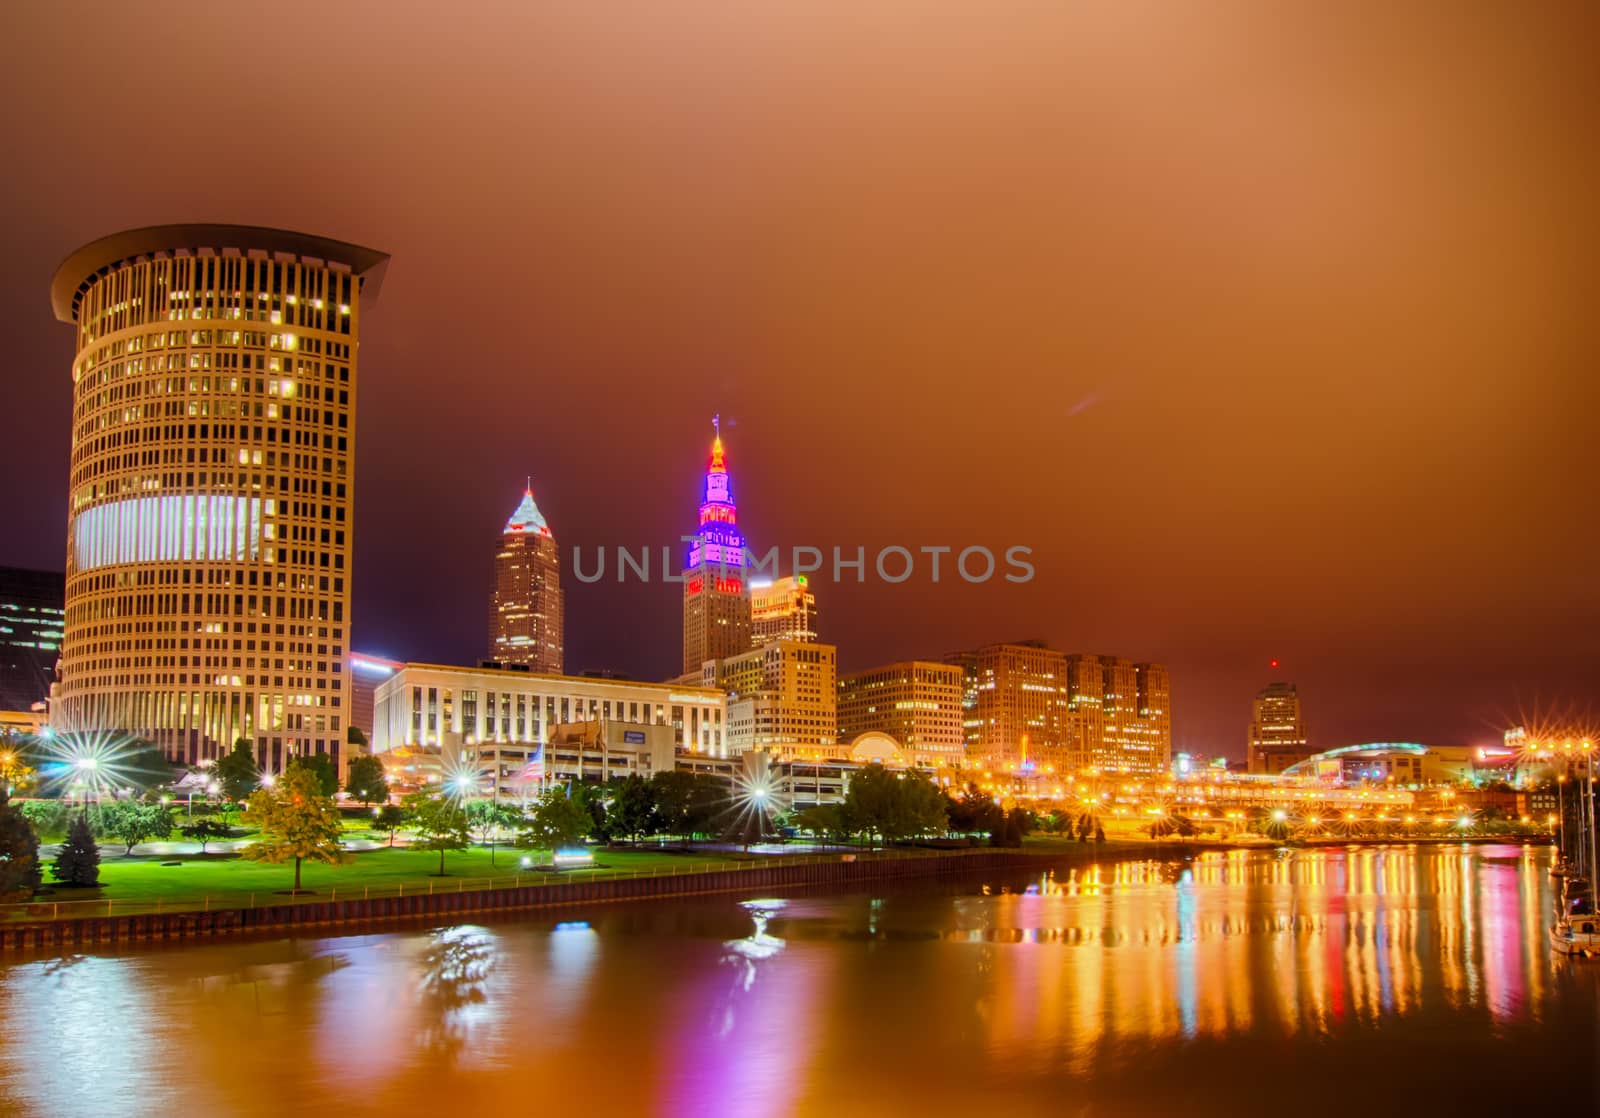 Cleveland. Image of Cleveland downtown at night by digidreamgrafix